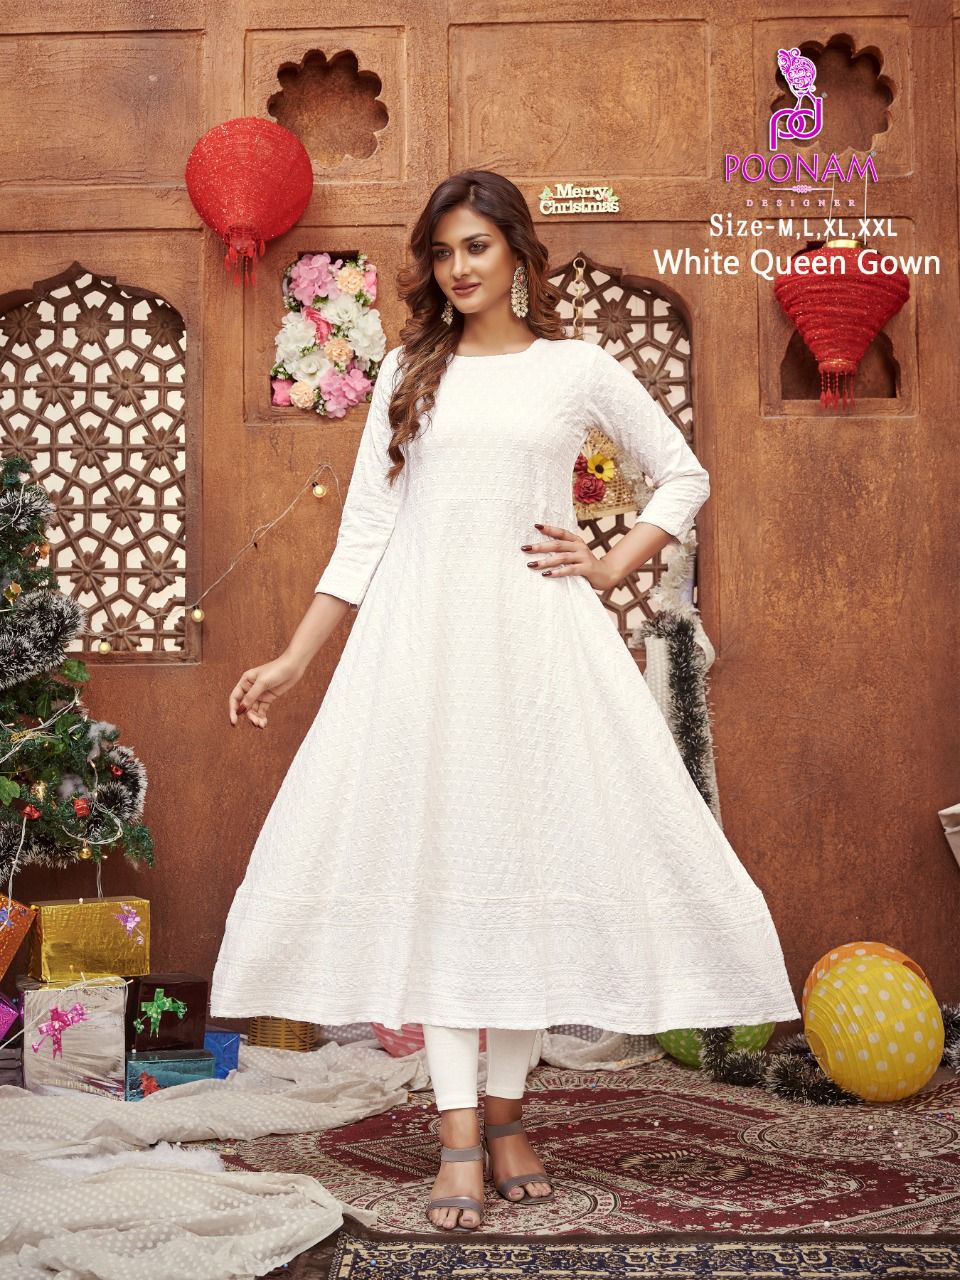 poonam White Queen collection 6